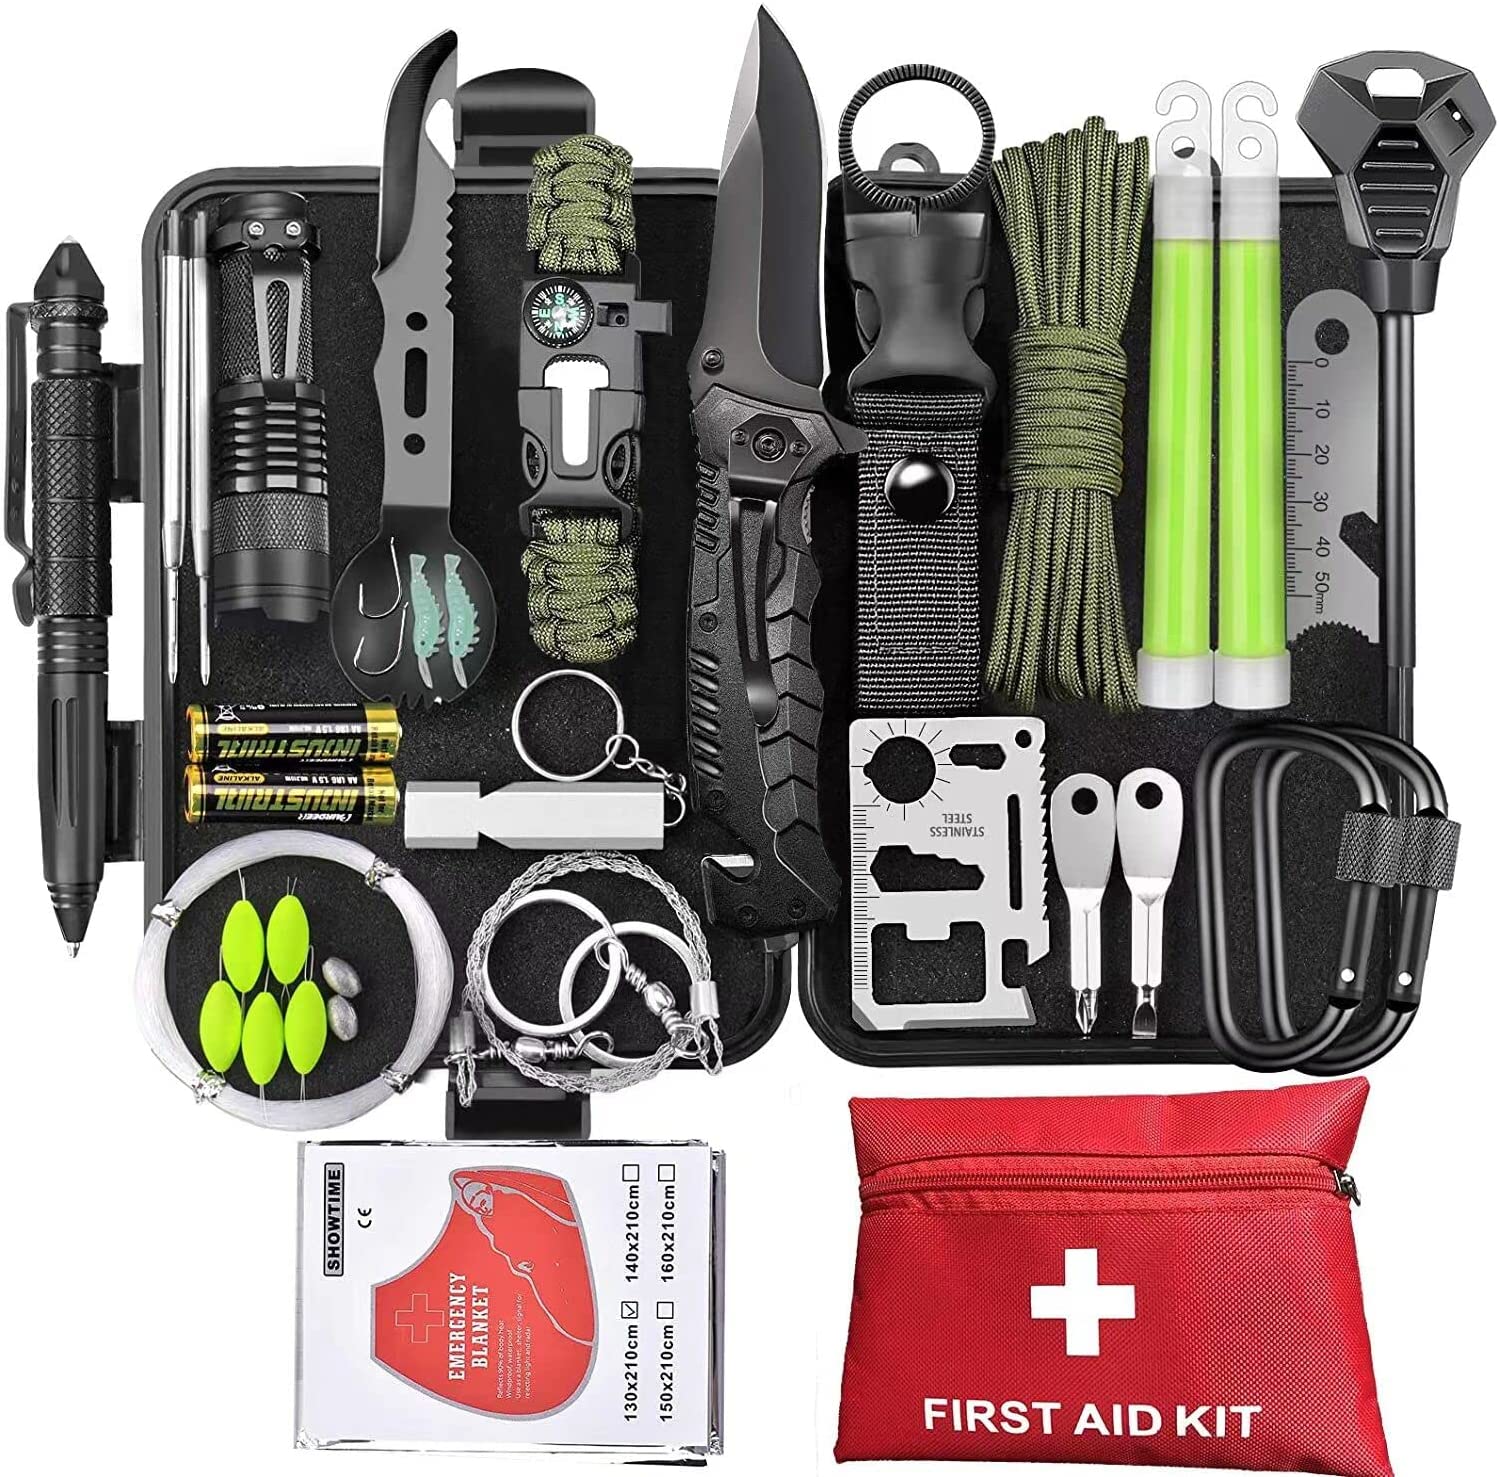 Survival Gear, Survival Gear and Equipment First Aid Kit 72 in 1, Survival Kits, Gifts for Men Dad Husband Fathers Day, Hiking Hunting Birthday Ideas for Women Him, Cool Gadgets, Camping Accessories